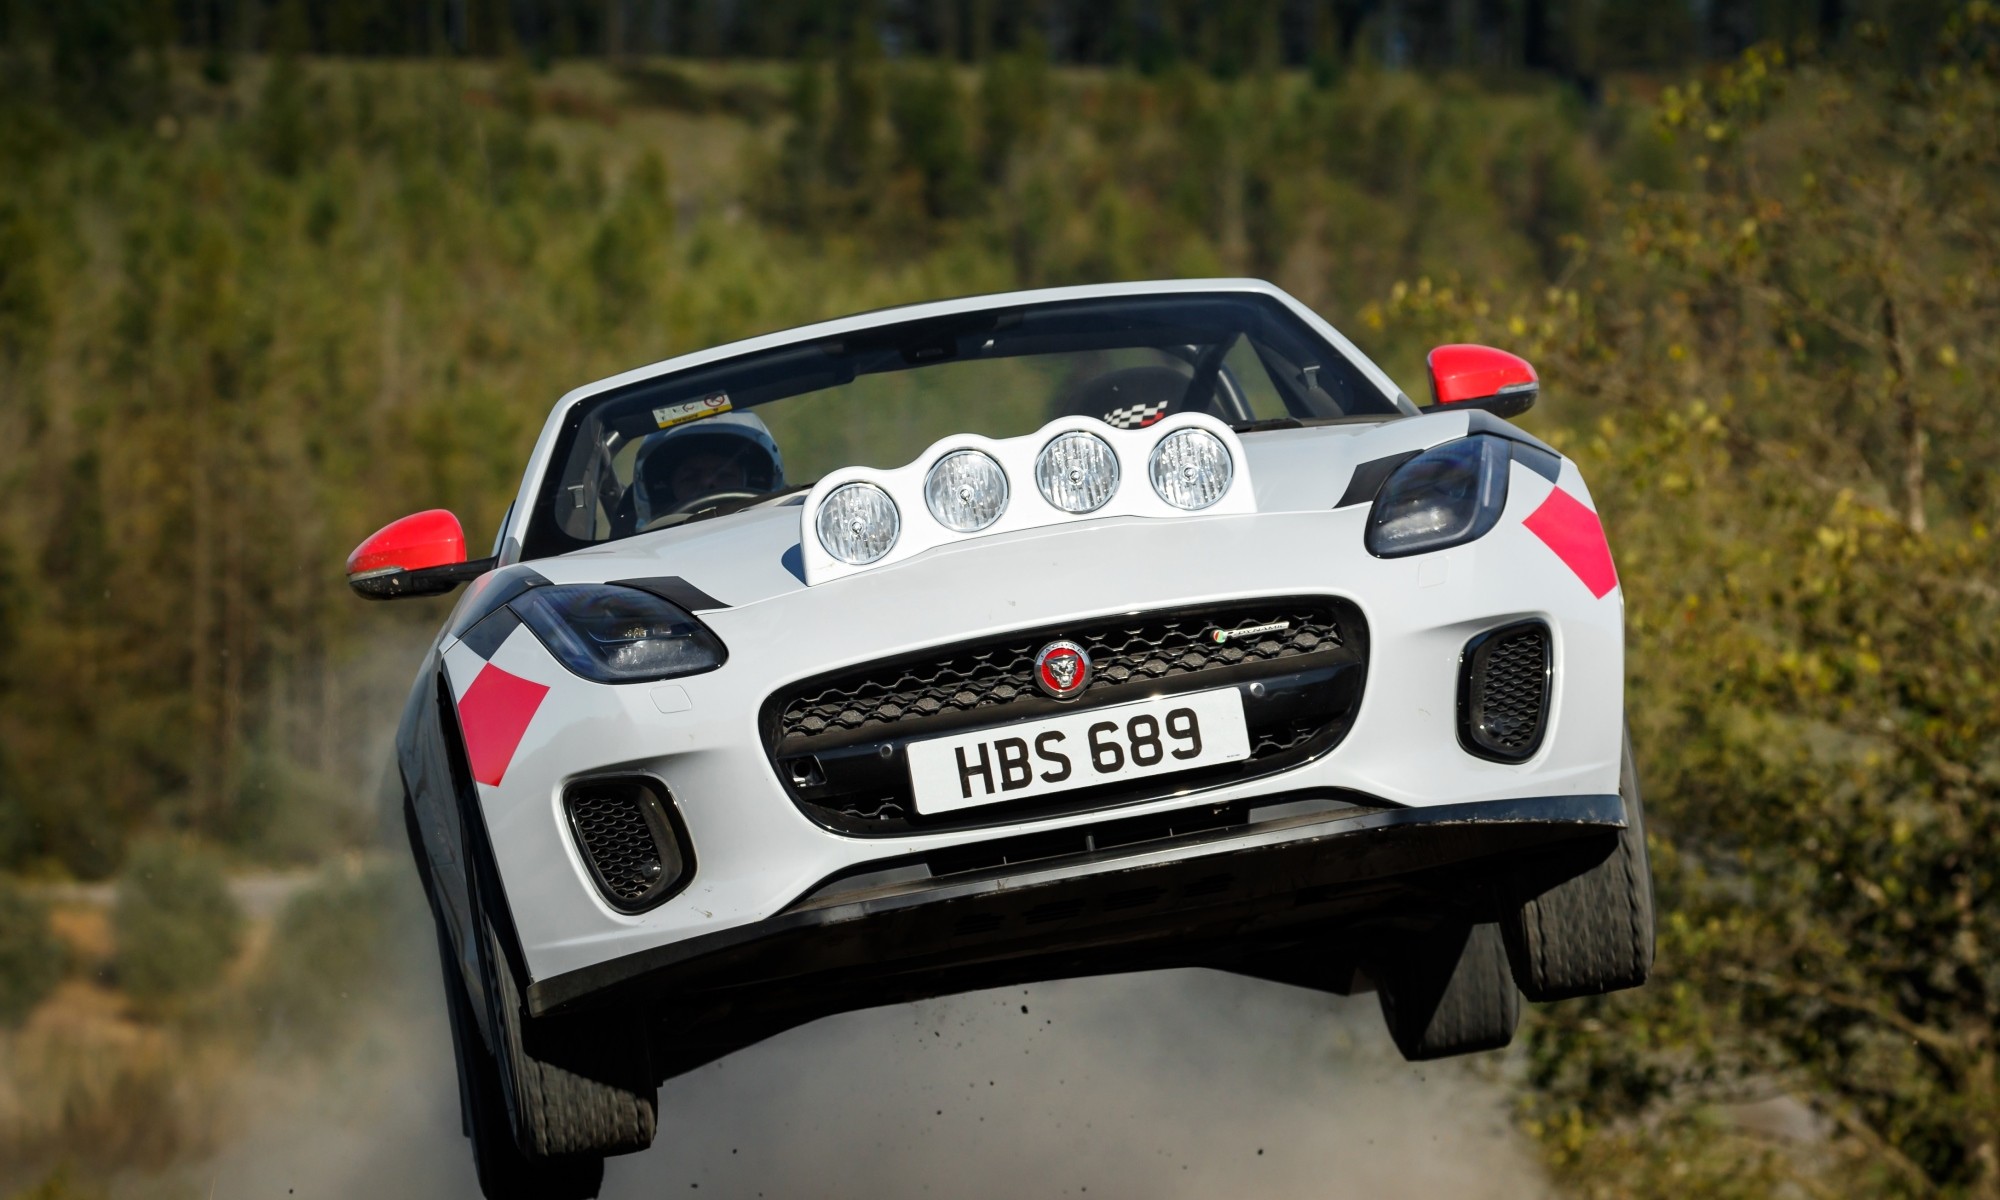 Not every day you see a Jaguar F-Type flying